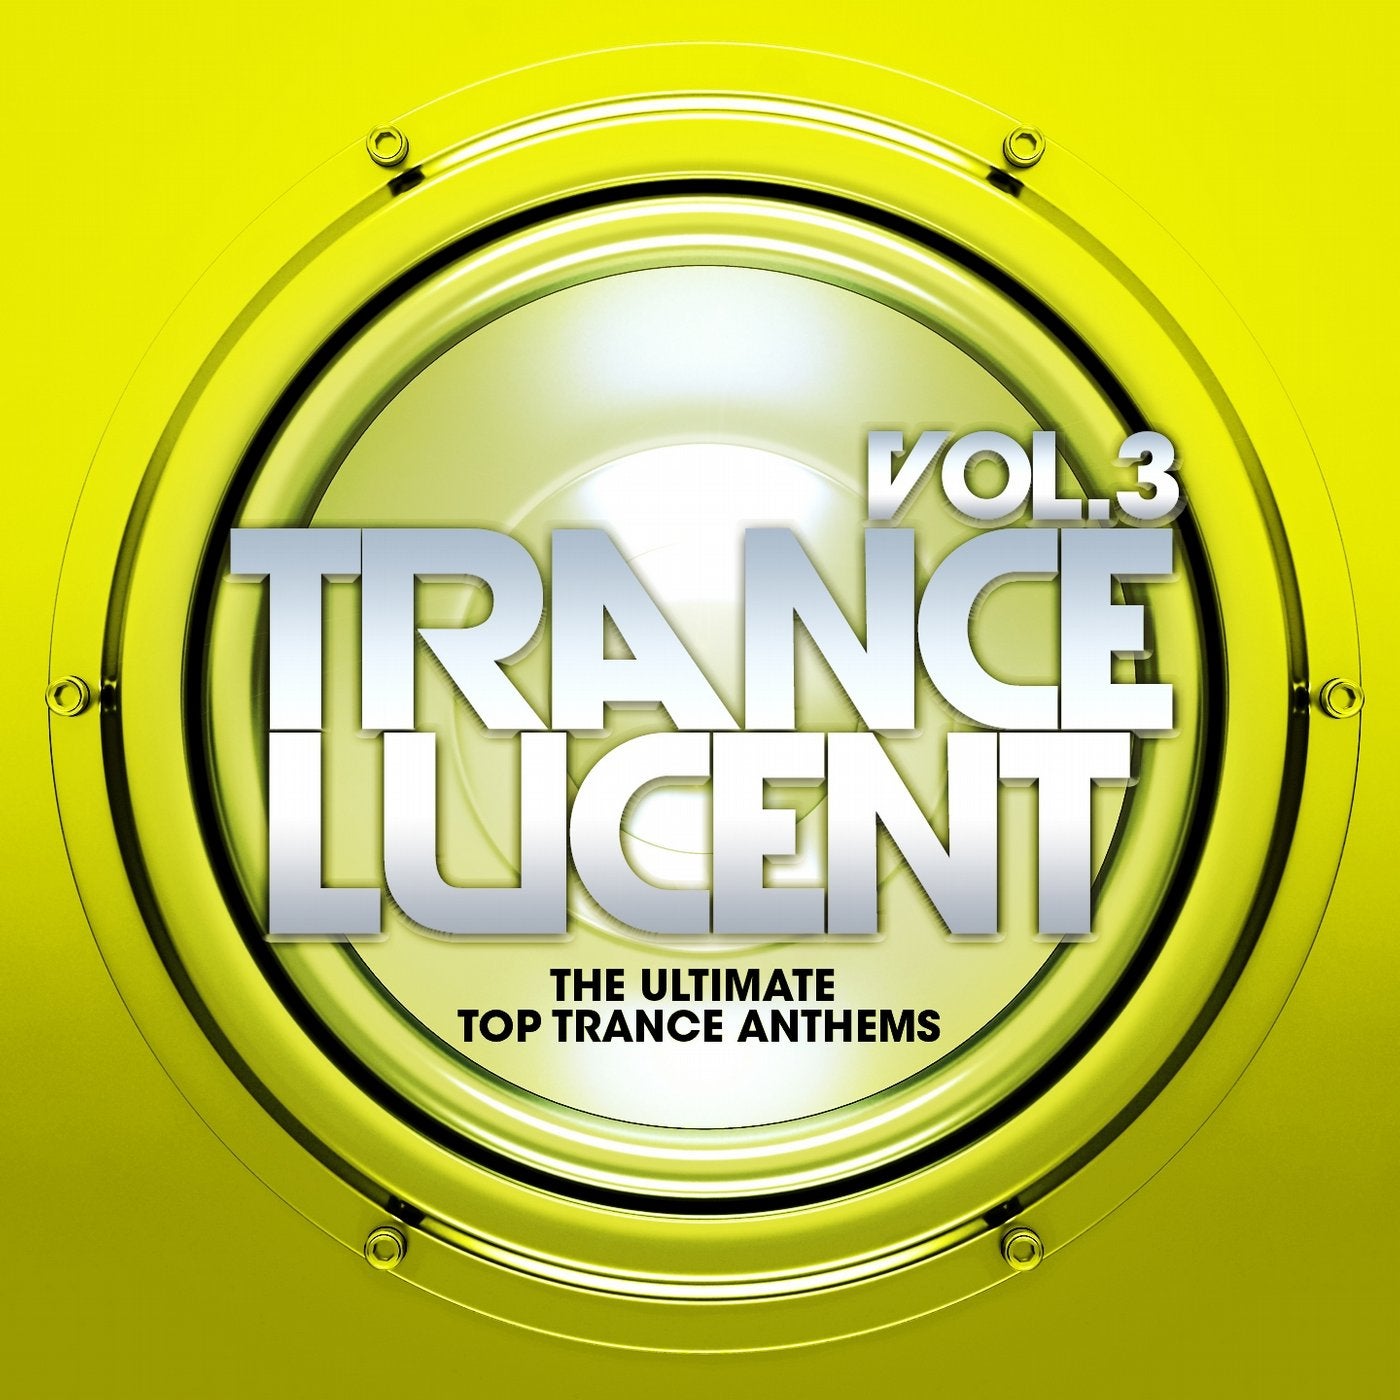 Trance Lucent, Vol.3 (The Ultimate Top Trance Anthems)